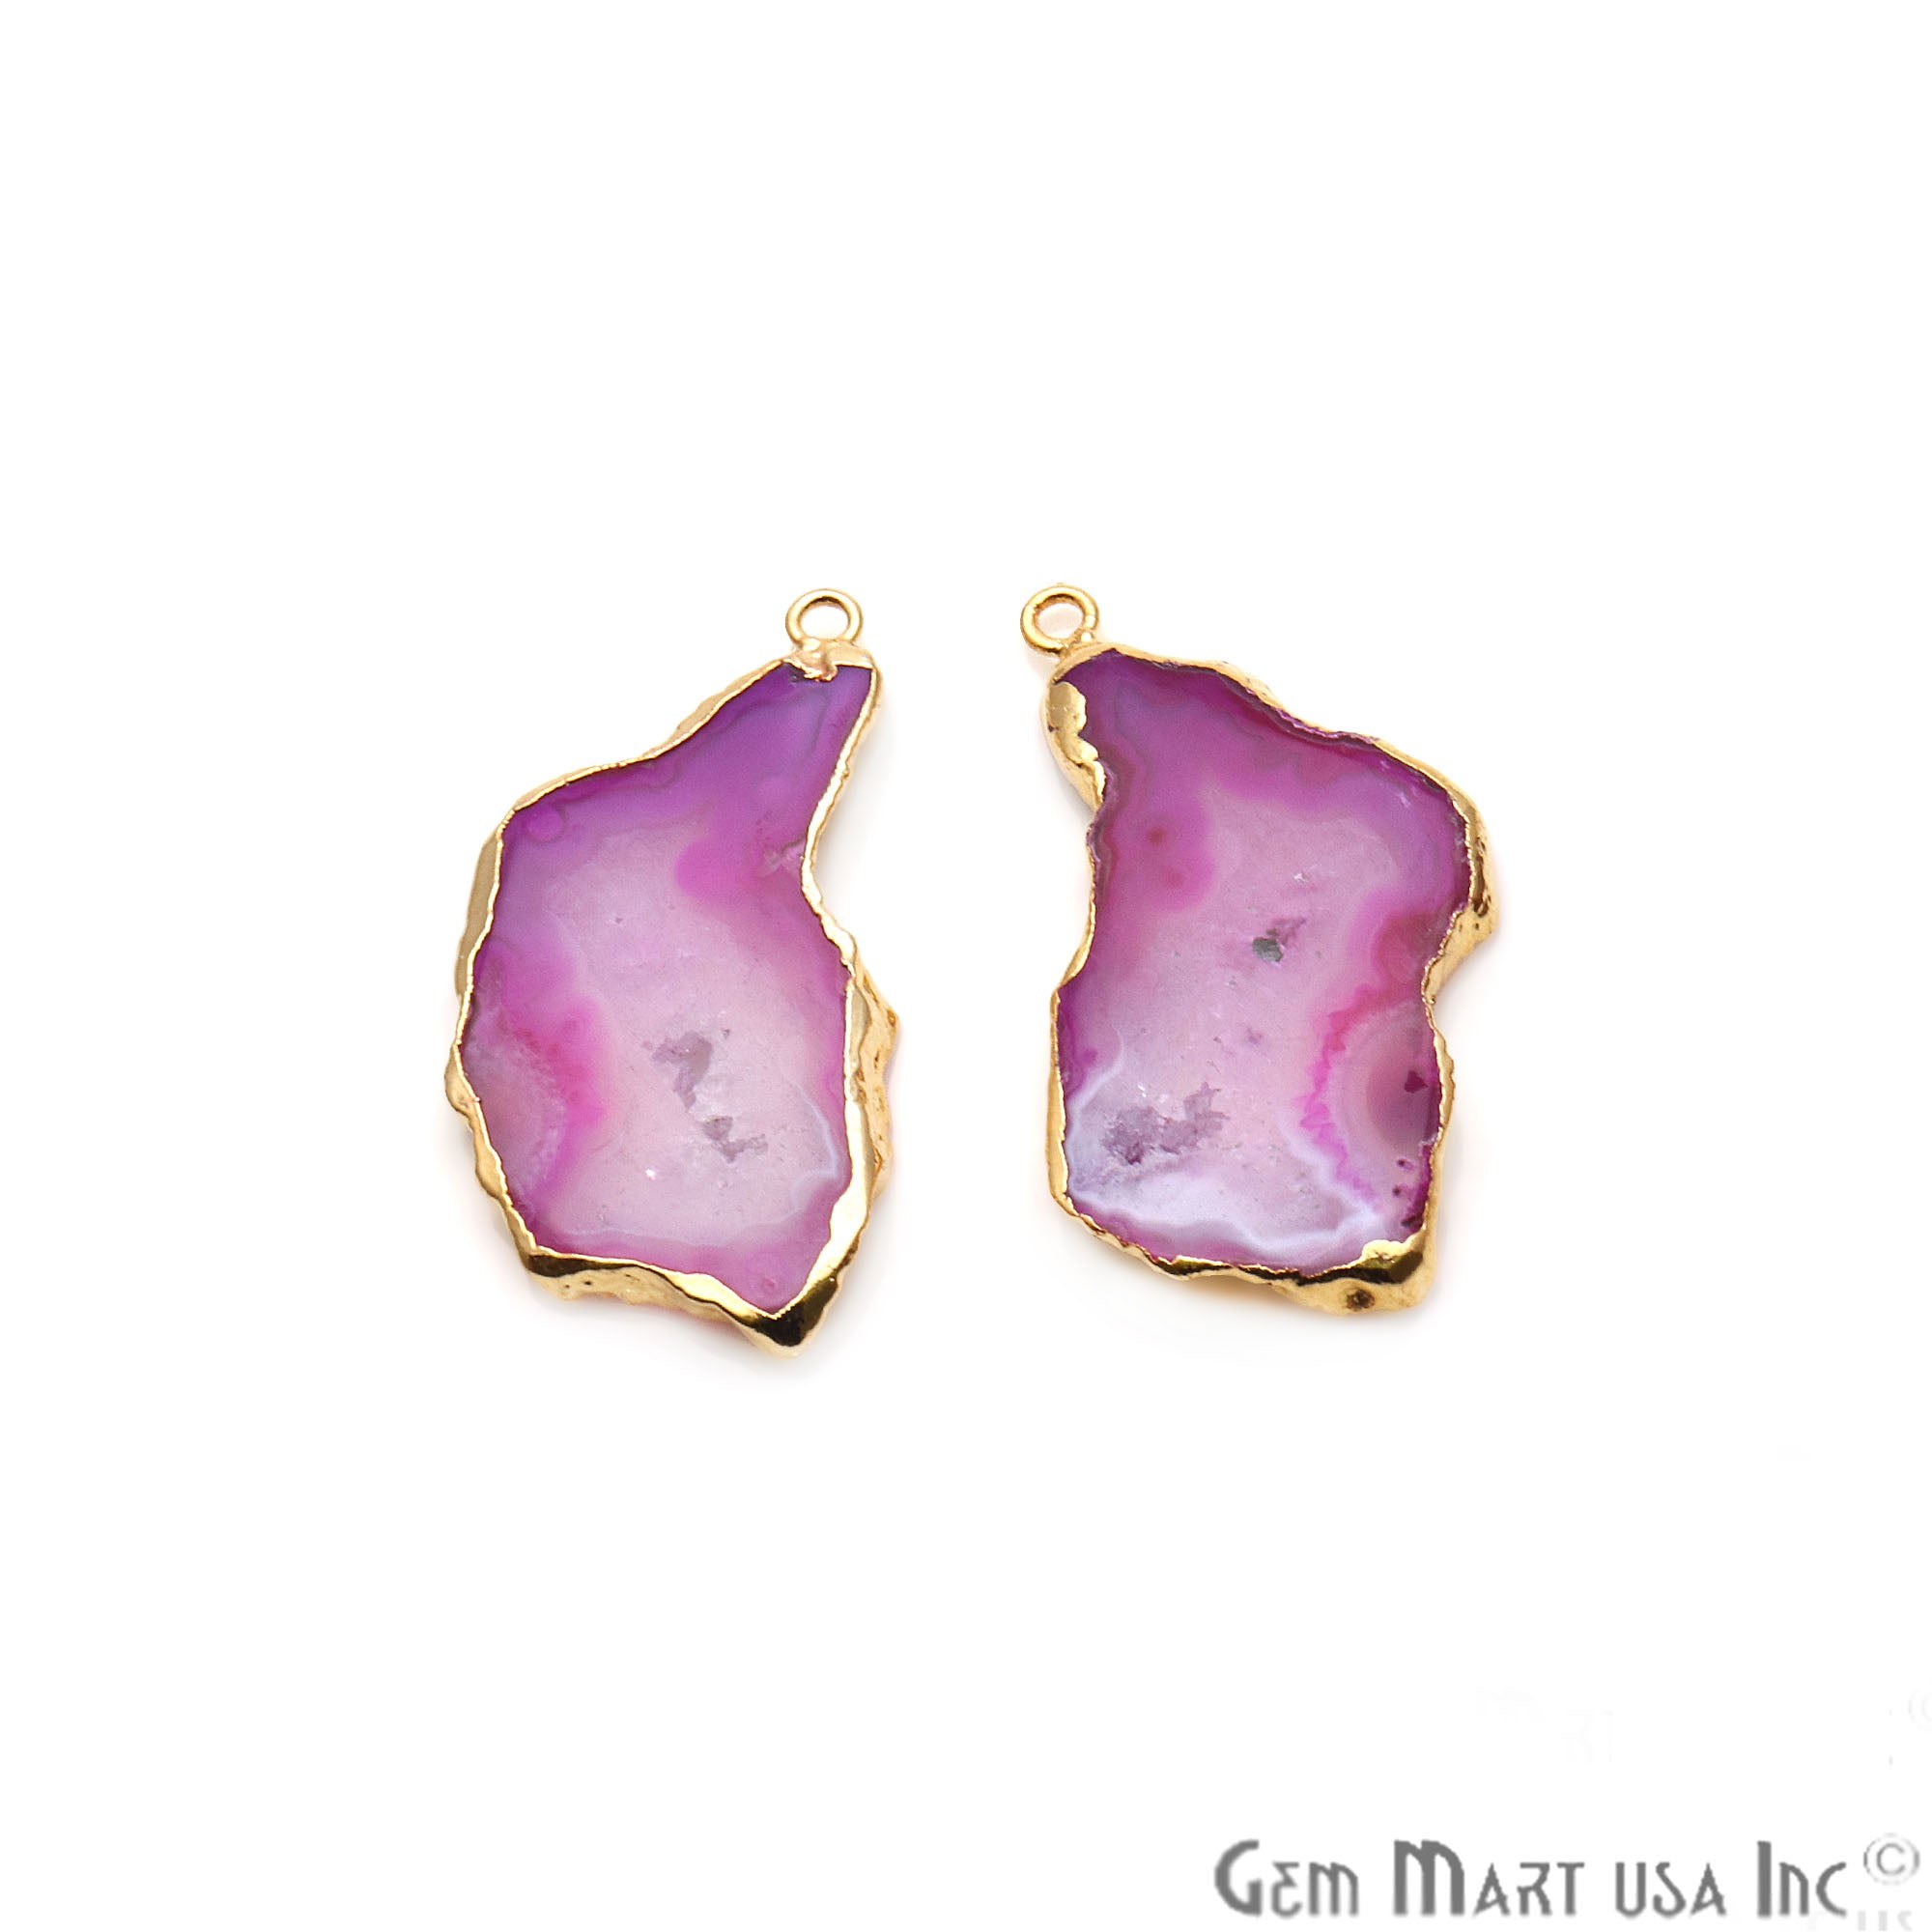 Agate Slice 38x18mm Organic Gold Electroplated Gemstone Earring Connector 1 Pair - GemMartUSA